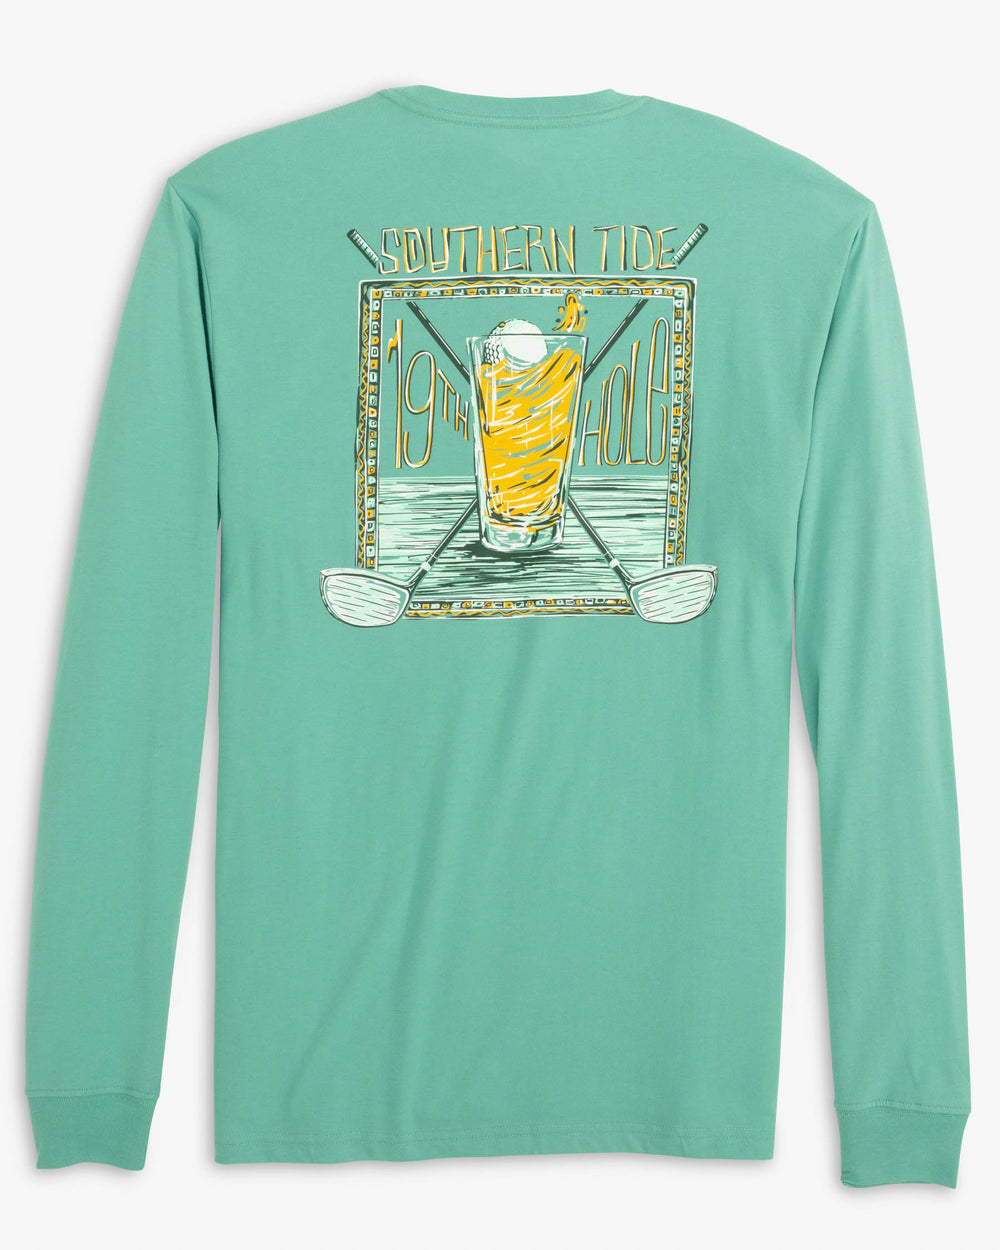 The back view of the 19th Hole Long Sleeve T-Shirt by Southern Tide - Agate Green